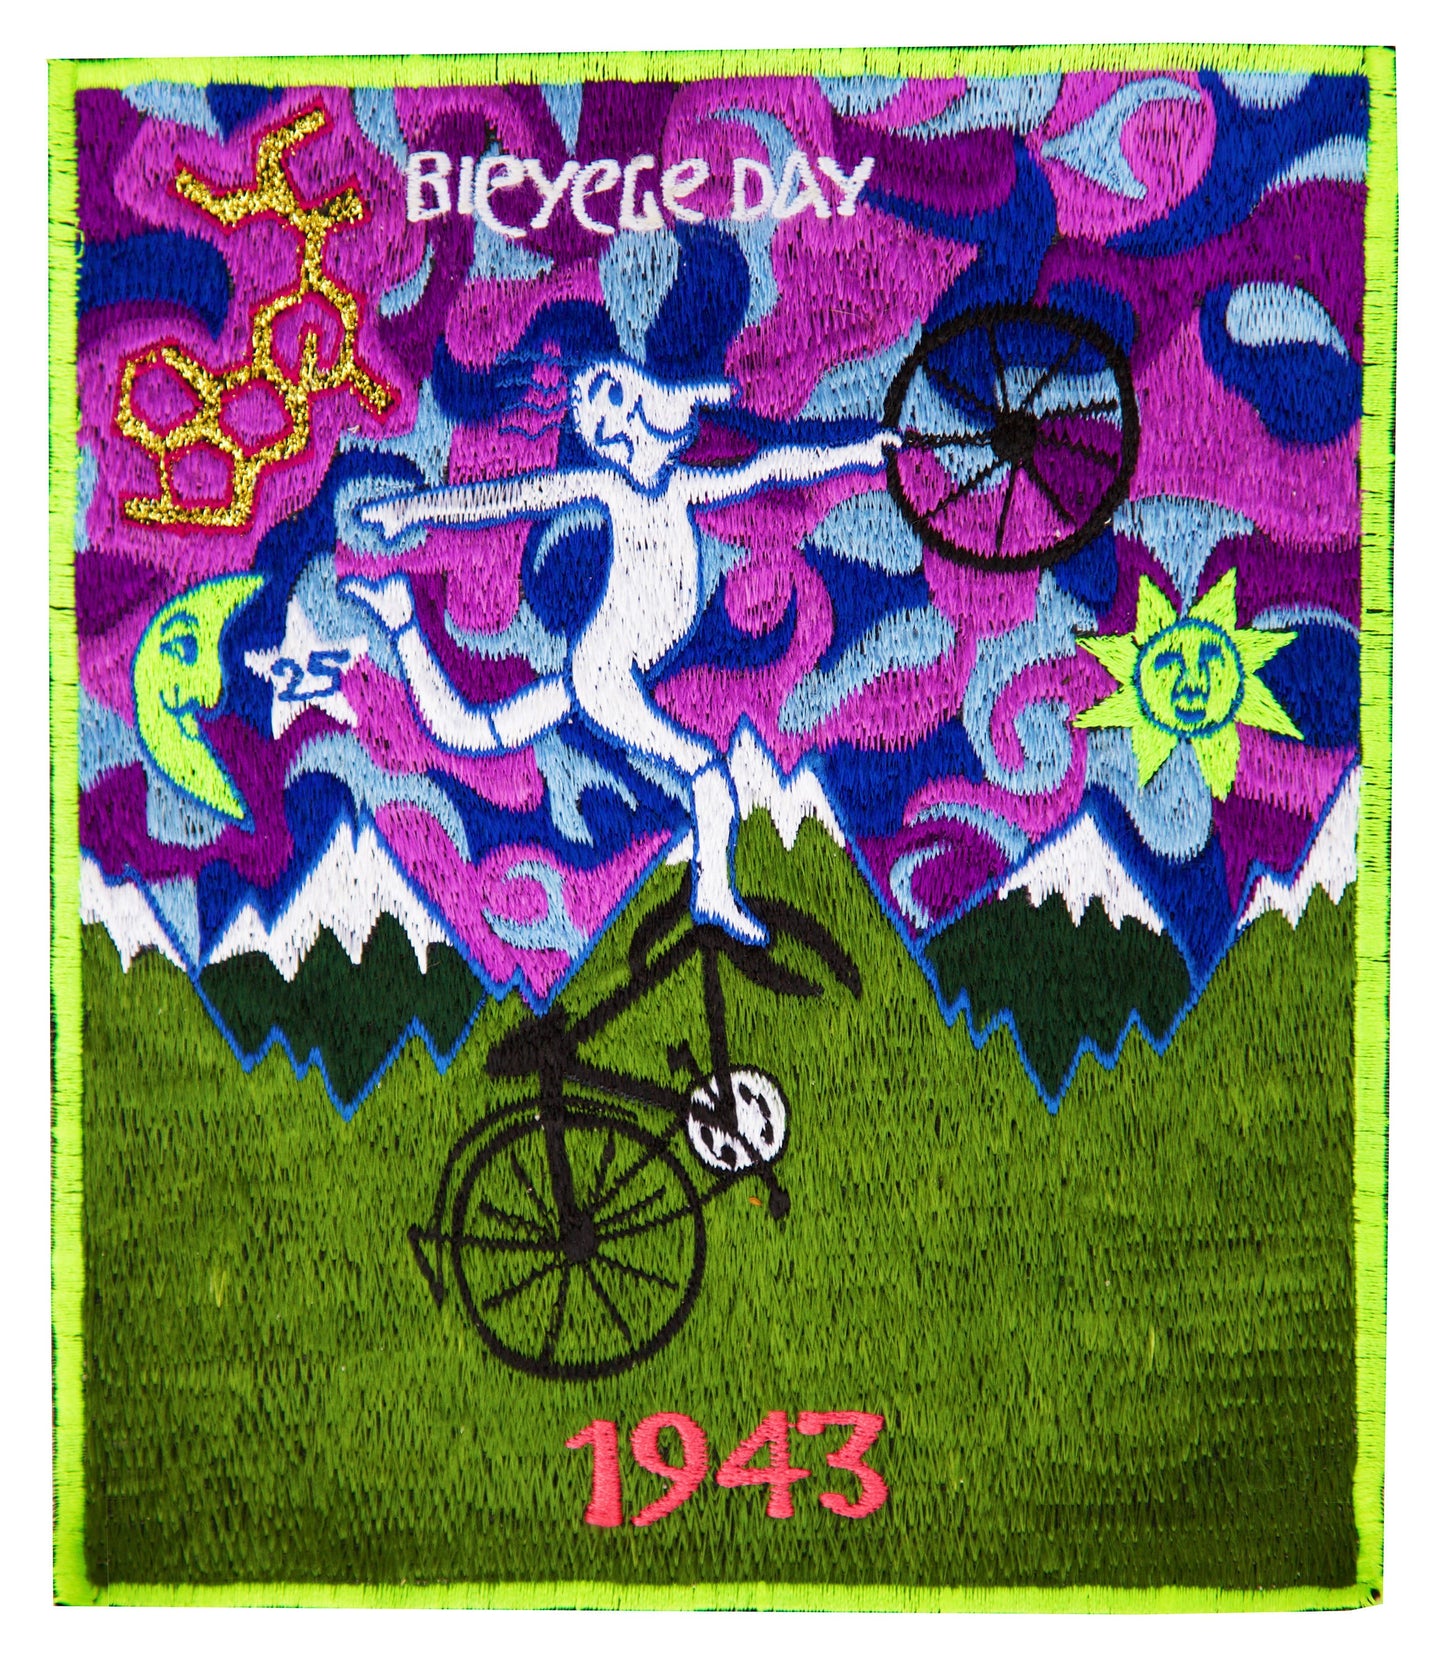 Pink Bicycleday Patch Psychedelic Albert Hofmann embroidery discovery of LSD vintage artwork Timothy Leary acid blotter art Bicycle Day